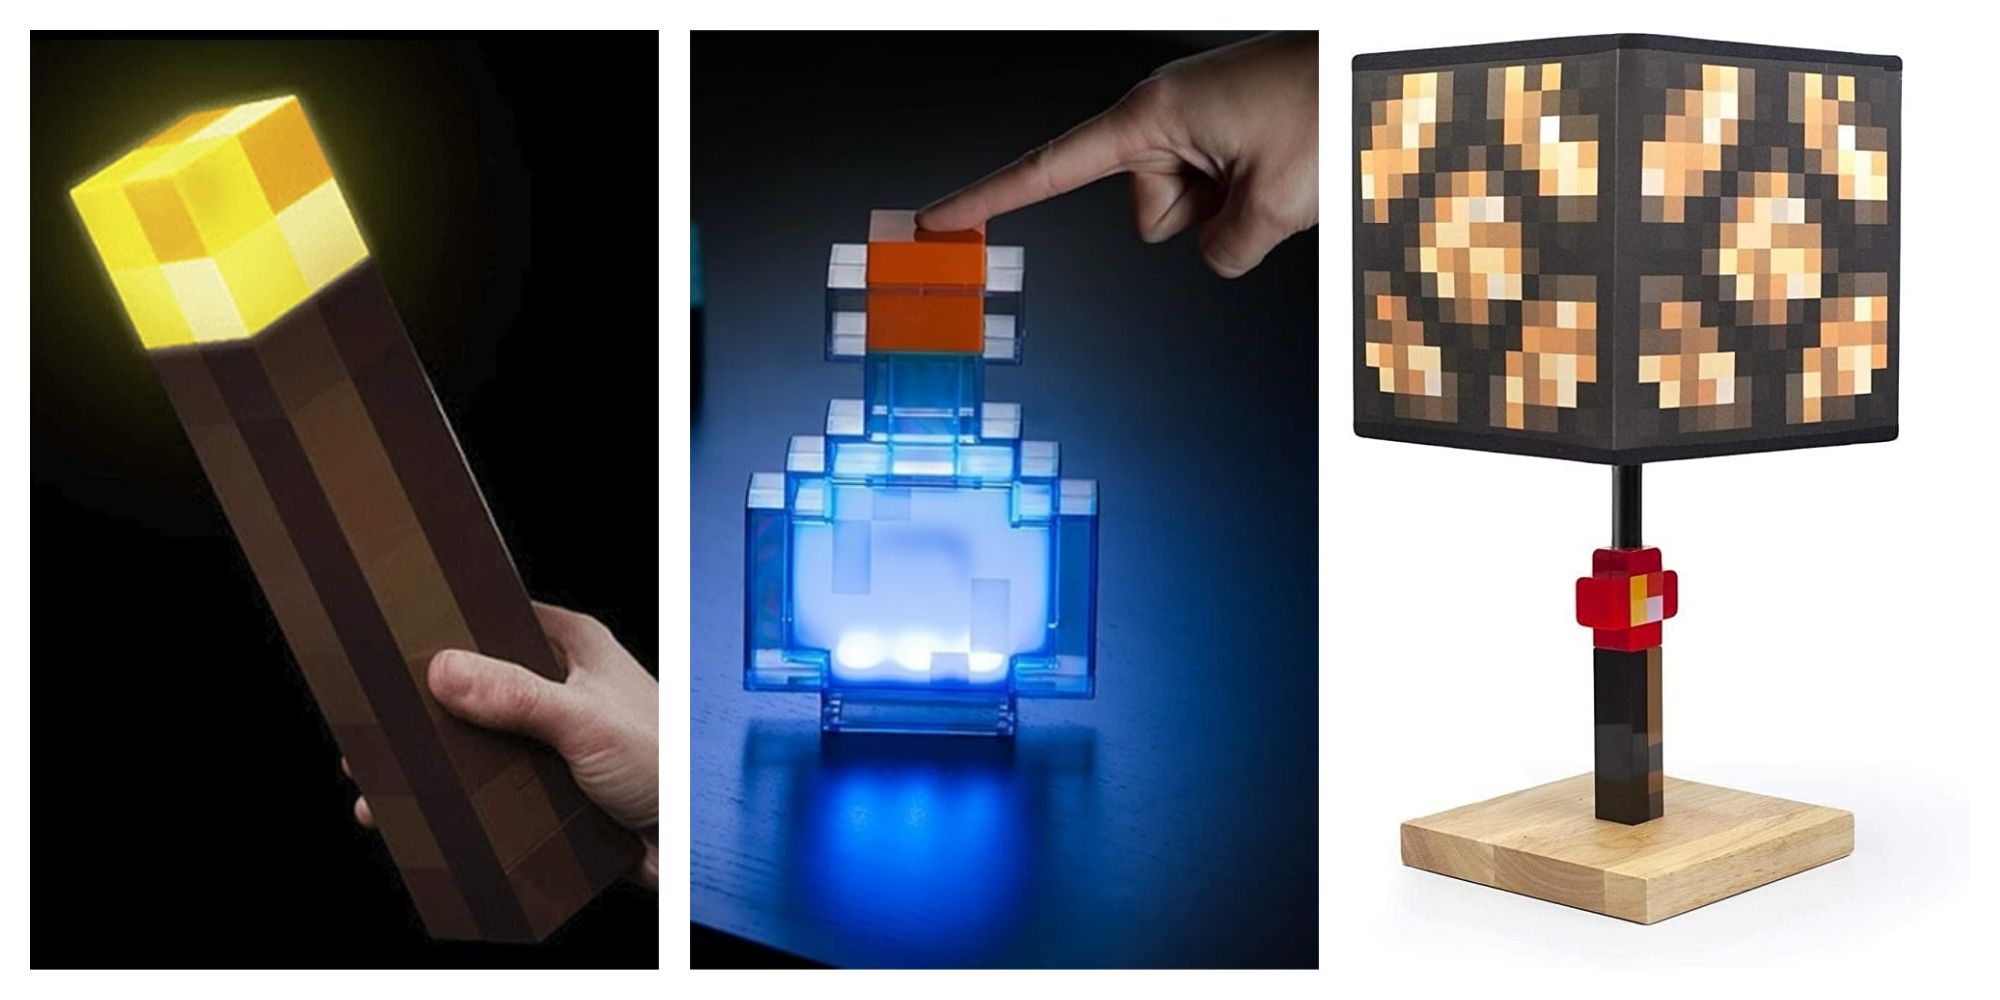 8 Perfect Holiday Gift Ideas For Minecraft Fans